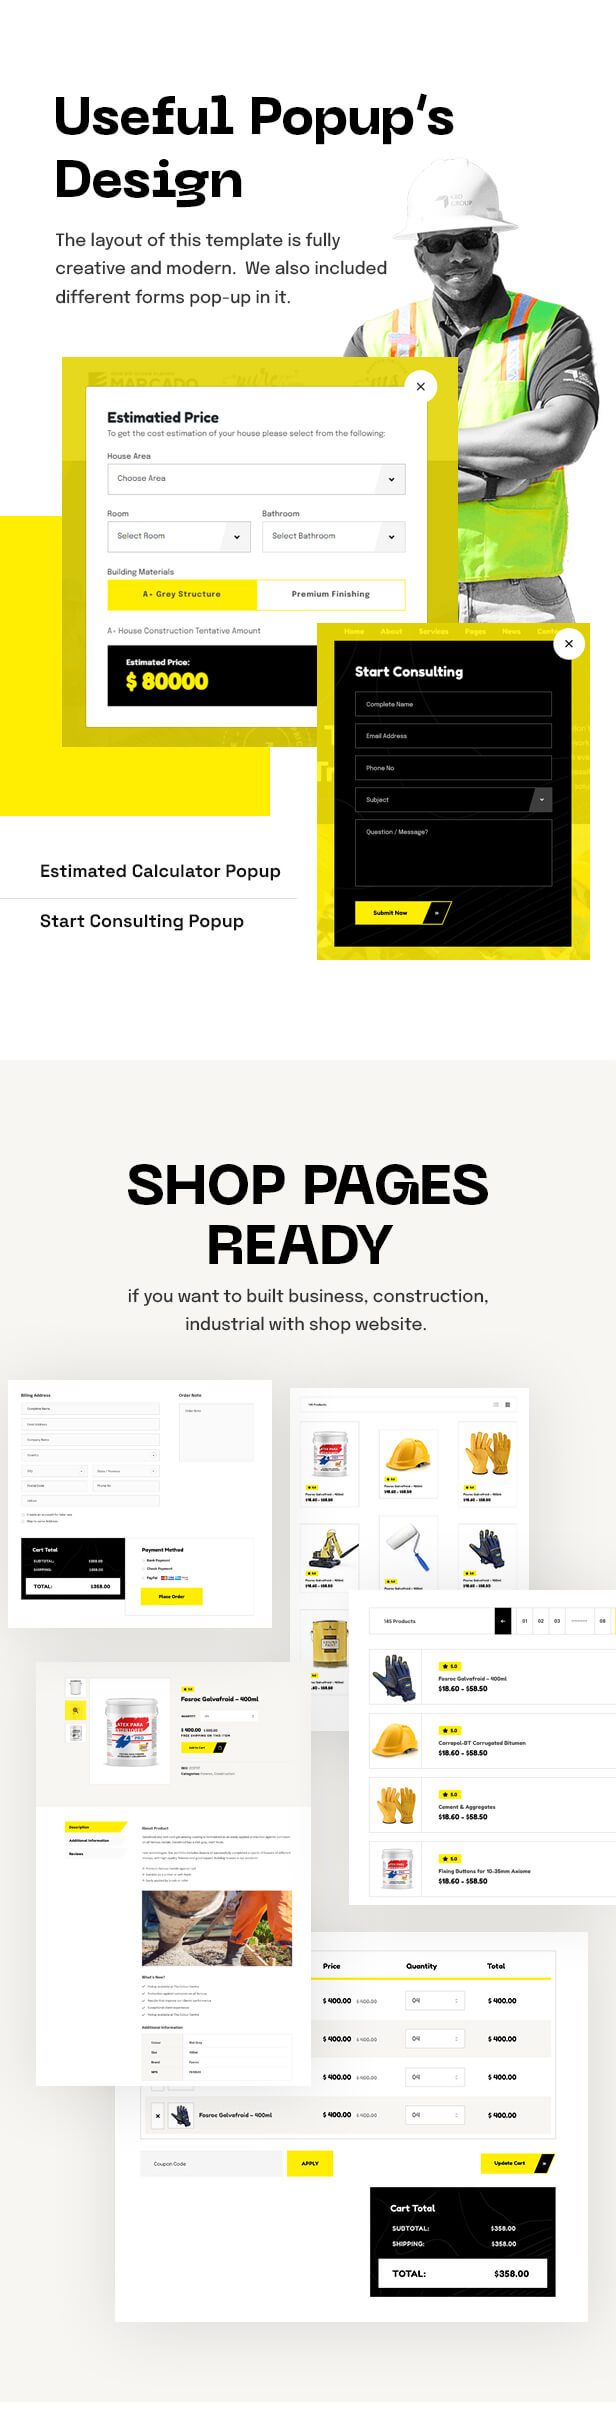 Builty - Industrial and Building Construction HTML Template - 4